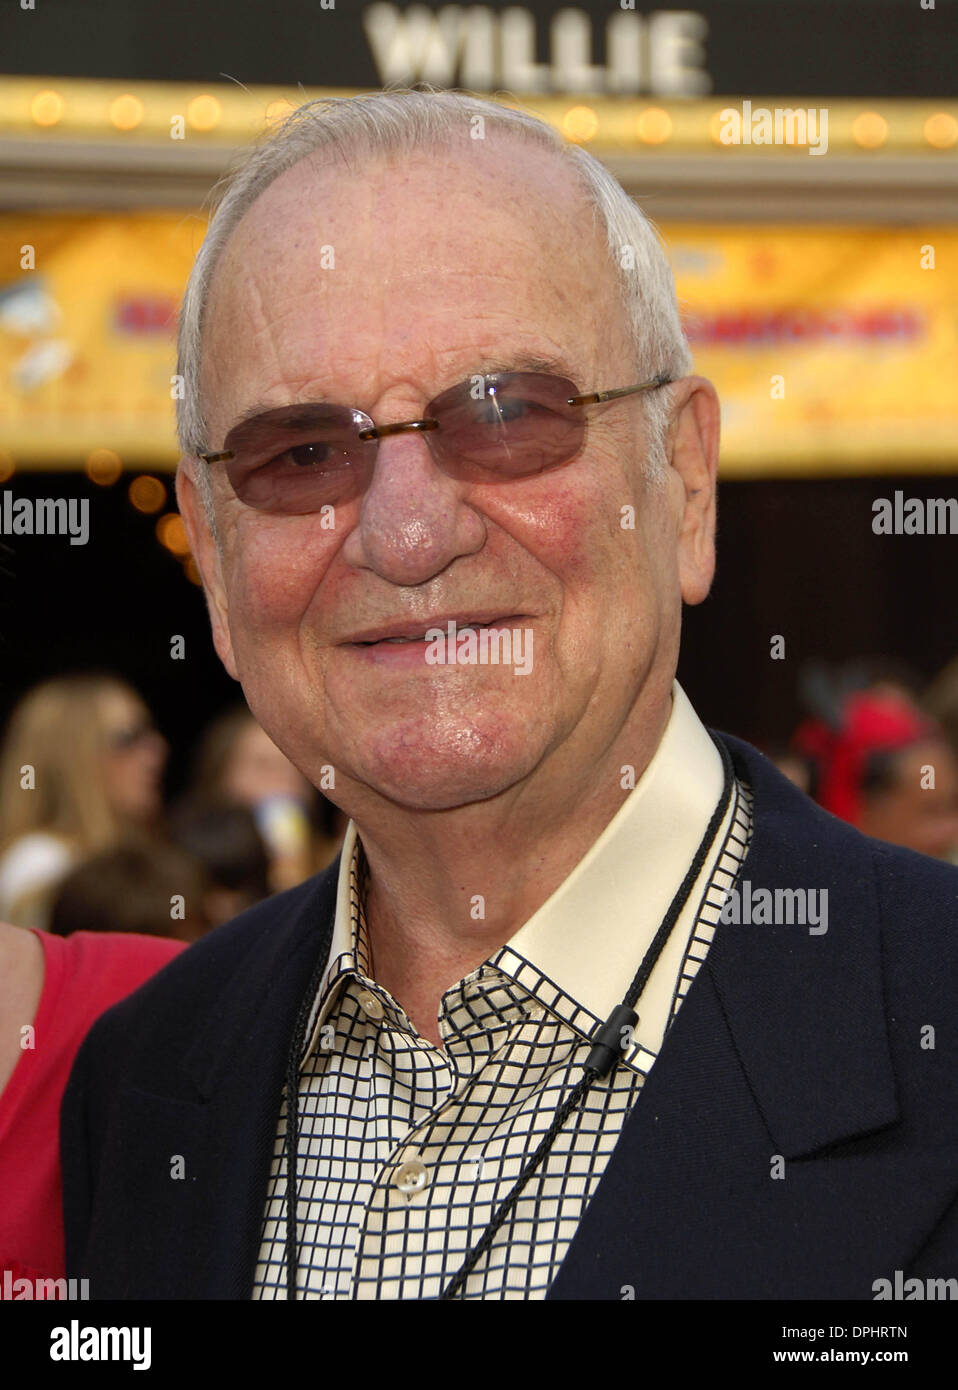 June 24, 2006 - Hollywood, California, U.S. - LOS ANGELES, CA JUNE 24, 2006 (SSI) - -.Automaker executive Lee Iacocca during the premiere of the new movie from Walt Disney Pictures' PIRATES OF THE CARIBBEAN: DEAD MAN'S CHEST, held at Disneyland, on June 24, 2006, in Anaheim, California.  s.K48436MG.  -  PHOTOS(Credit Image: © Michael Germana/Globe Photos/ZUMAPRESS.com) Stock Photo